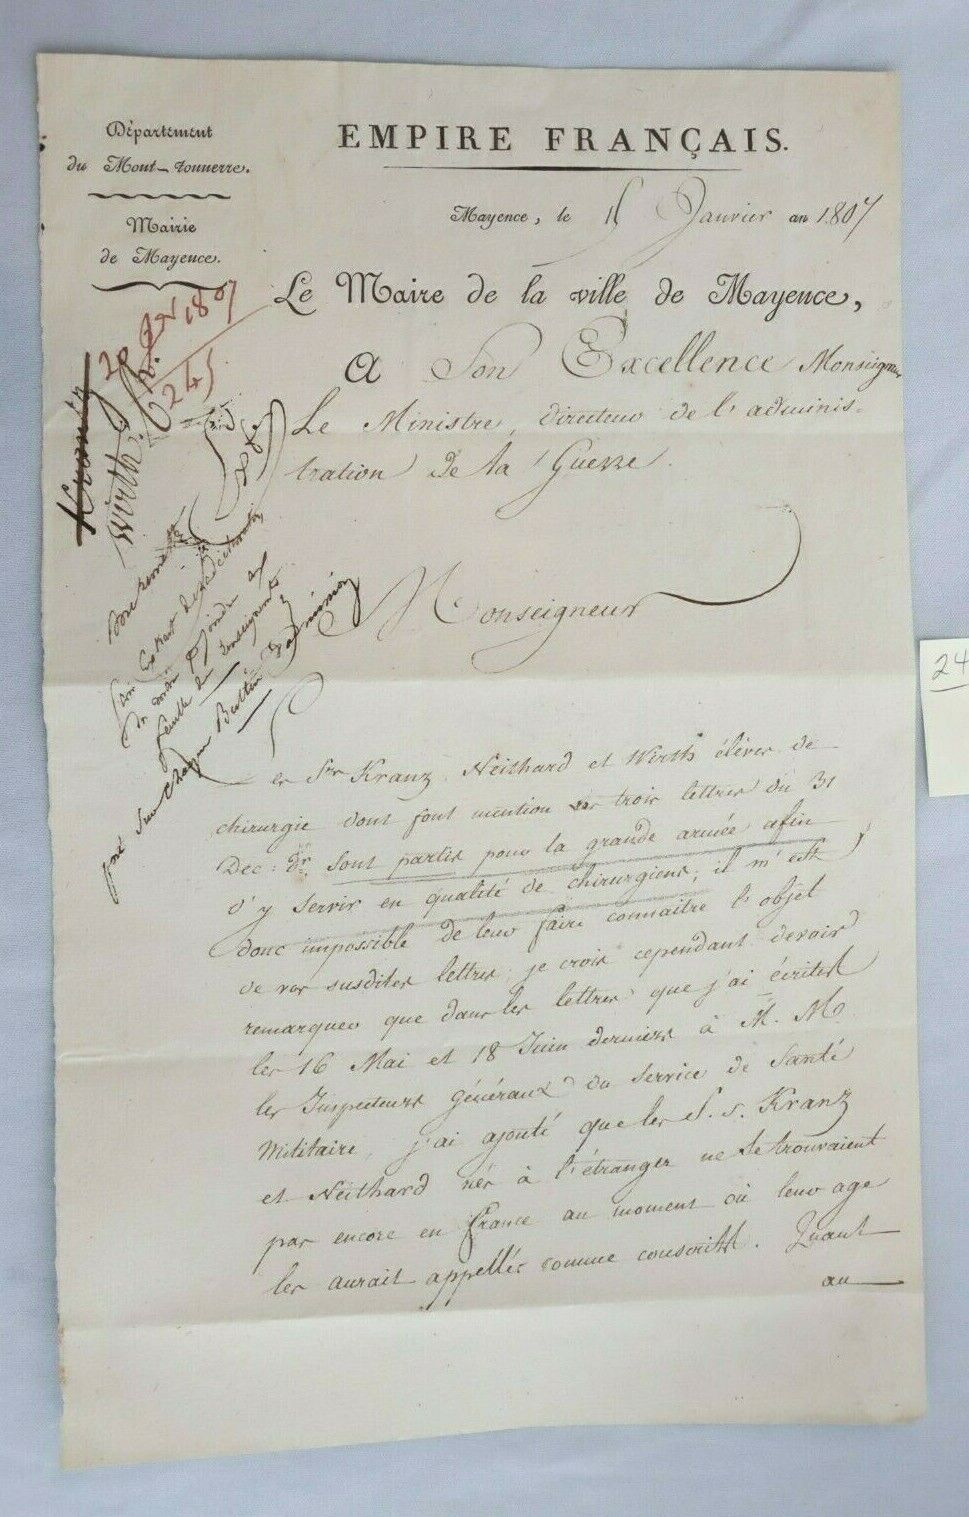 1807 Letter by French Mayor of Maynce (Mainz) Napoleon Waterloo Battle War